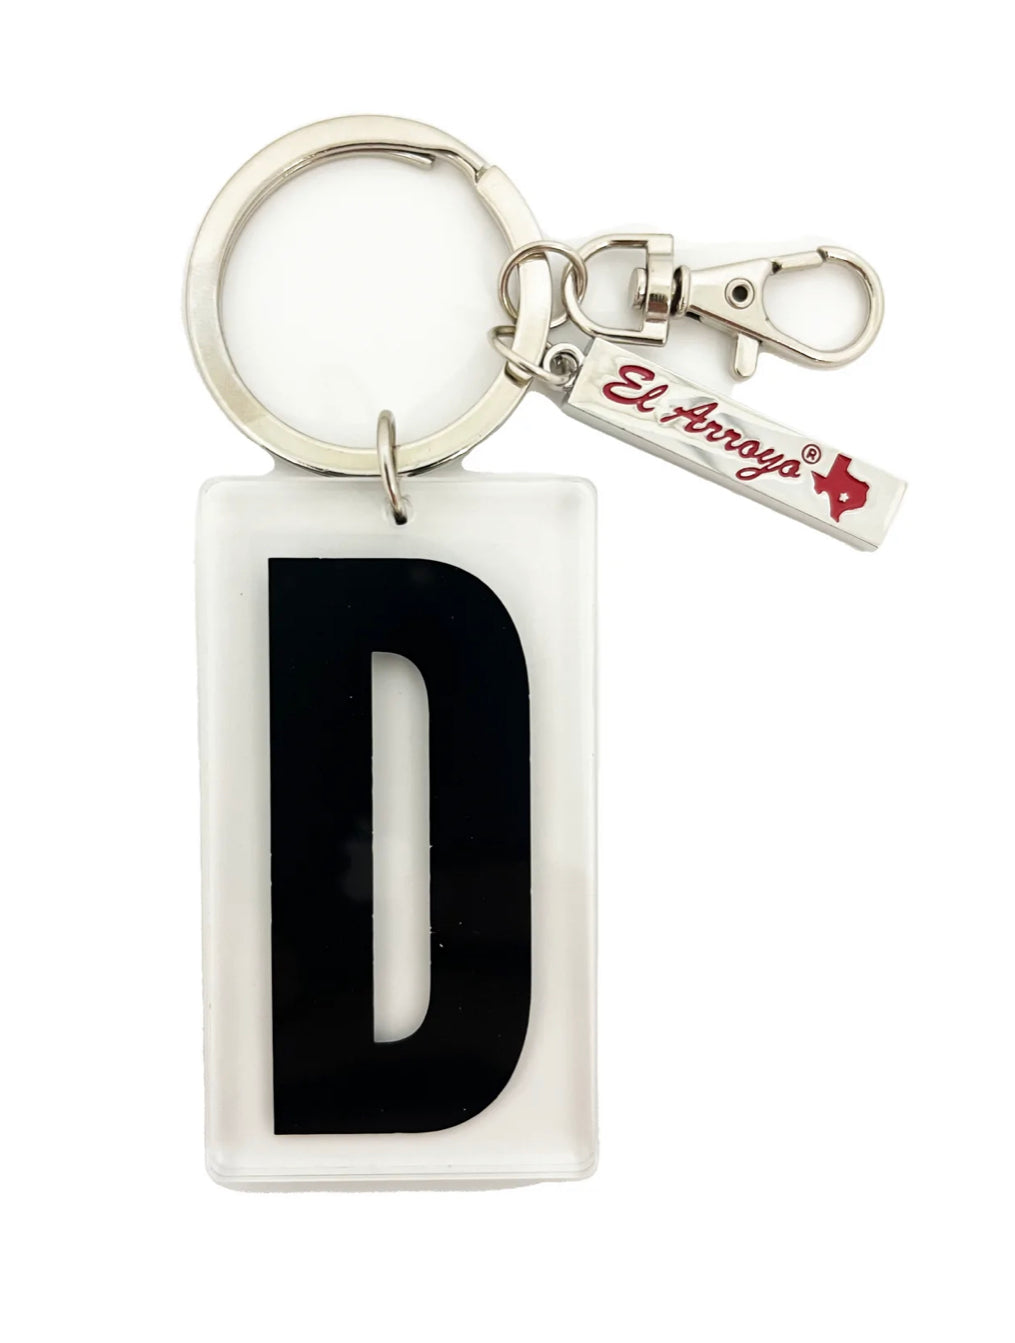 EL ARROYO MARQUEE LETTER KEYCHAINS